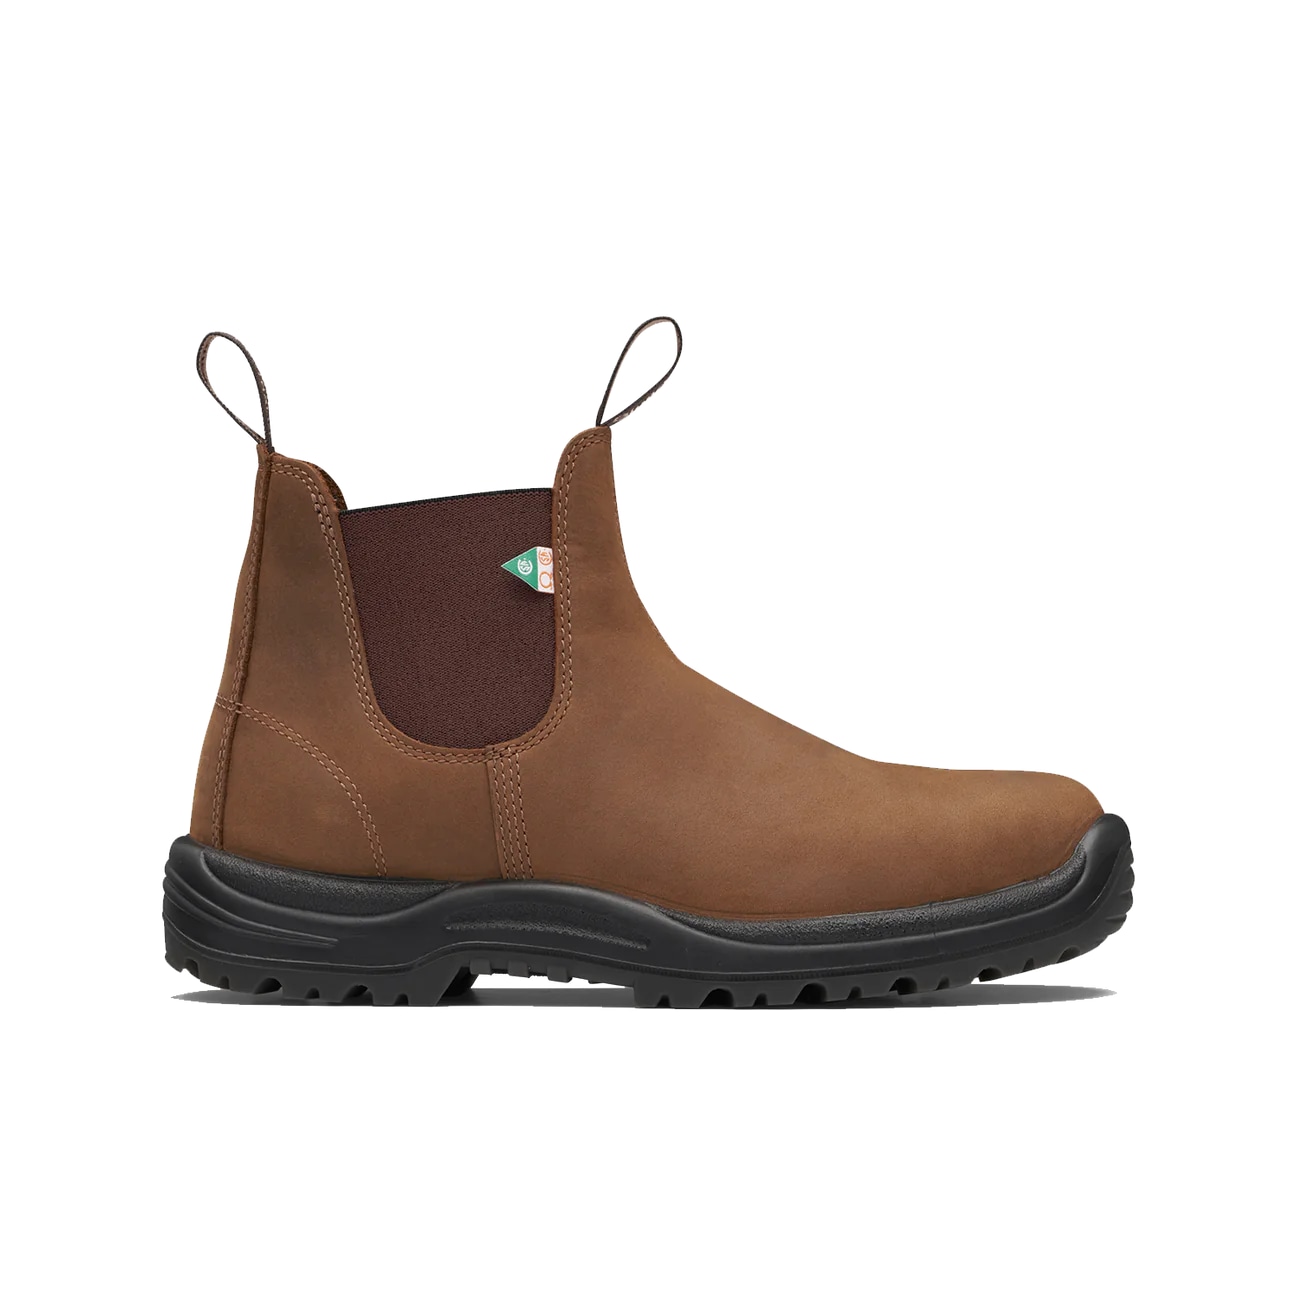 Unisex Work & Safety CSA Greenpatch Boots Crazy Horse Brown